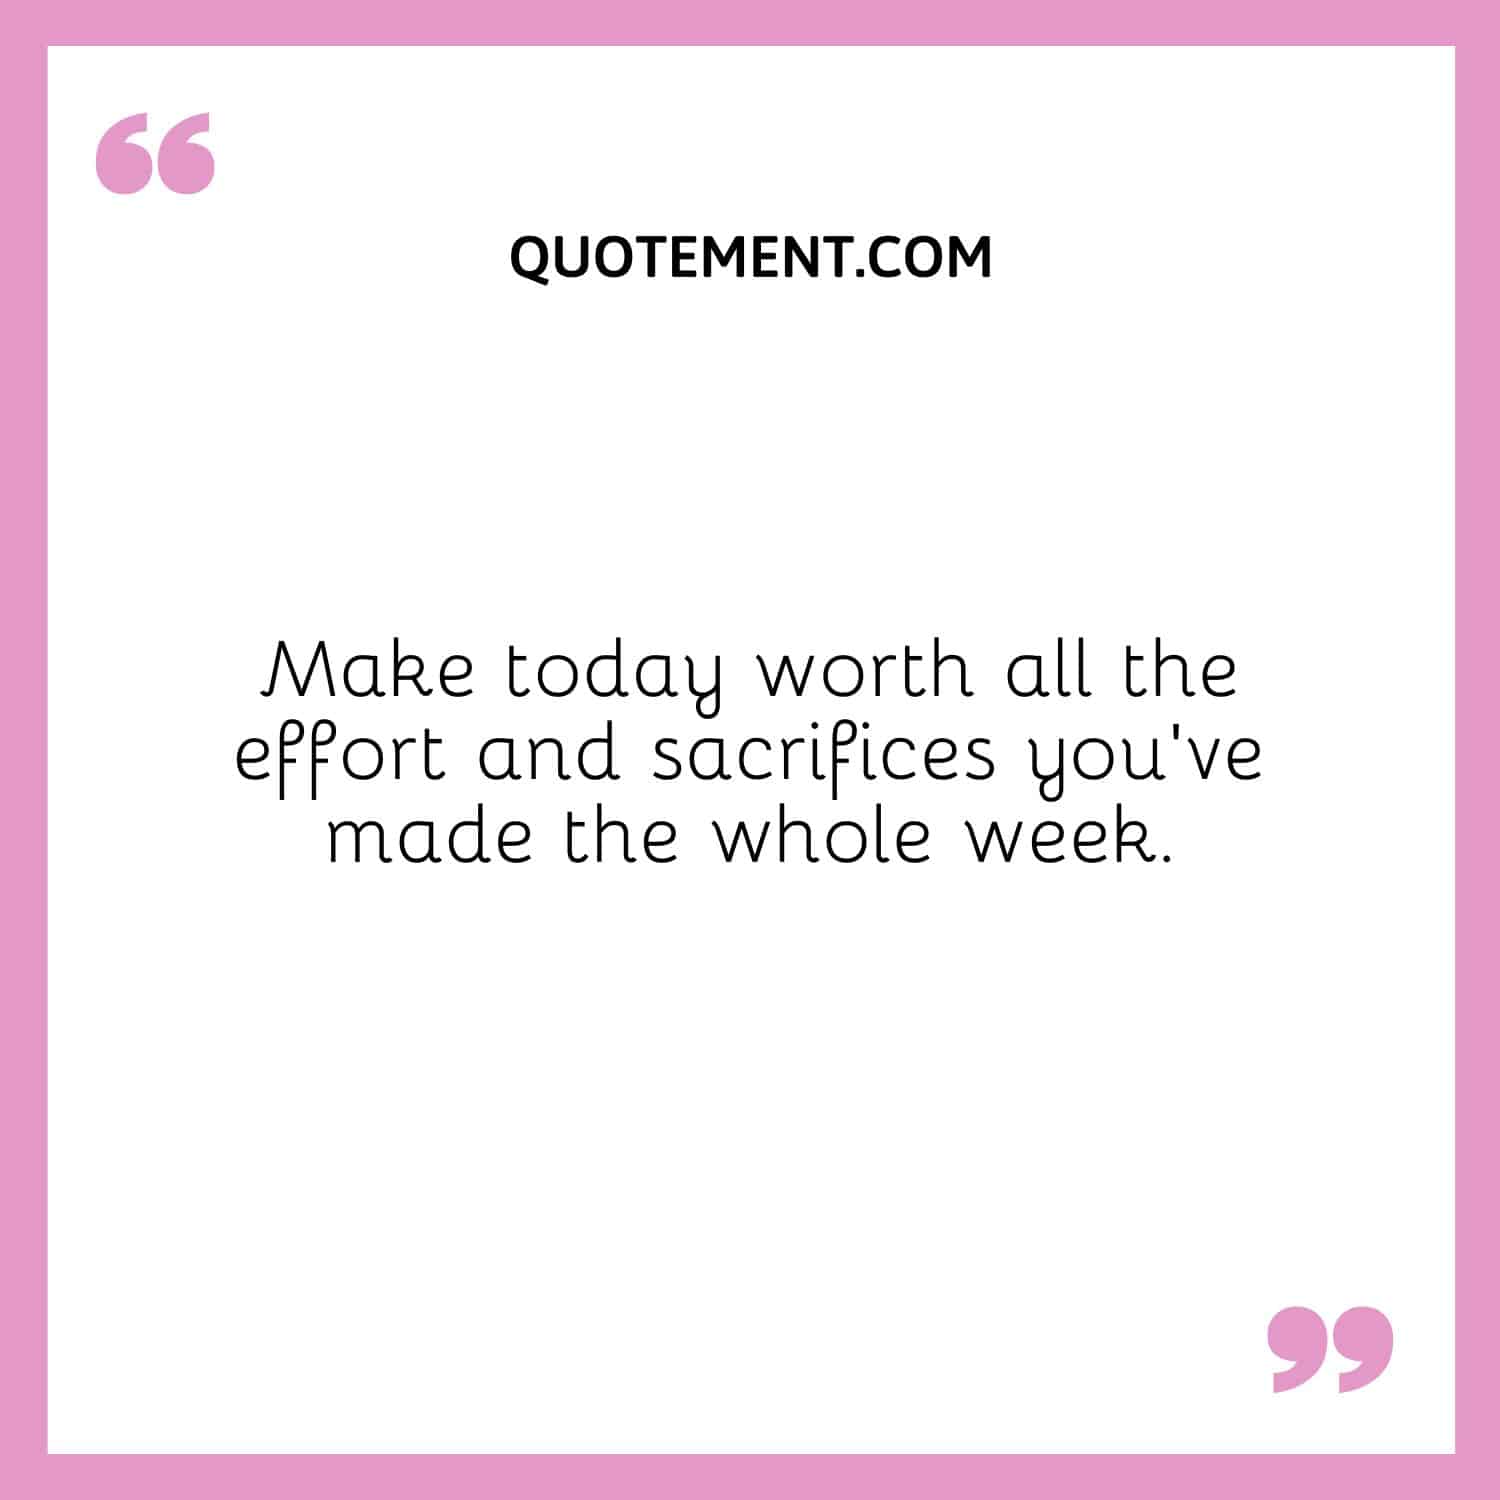 Make today worth all the effort and sacrifices you’ve made the whole week